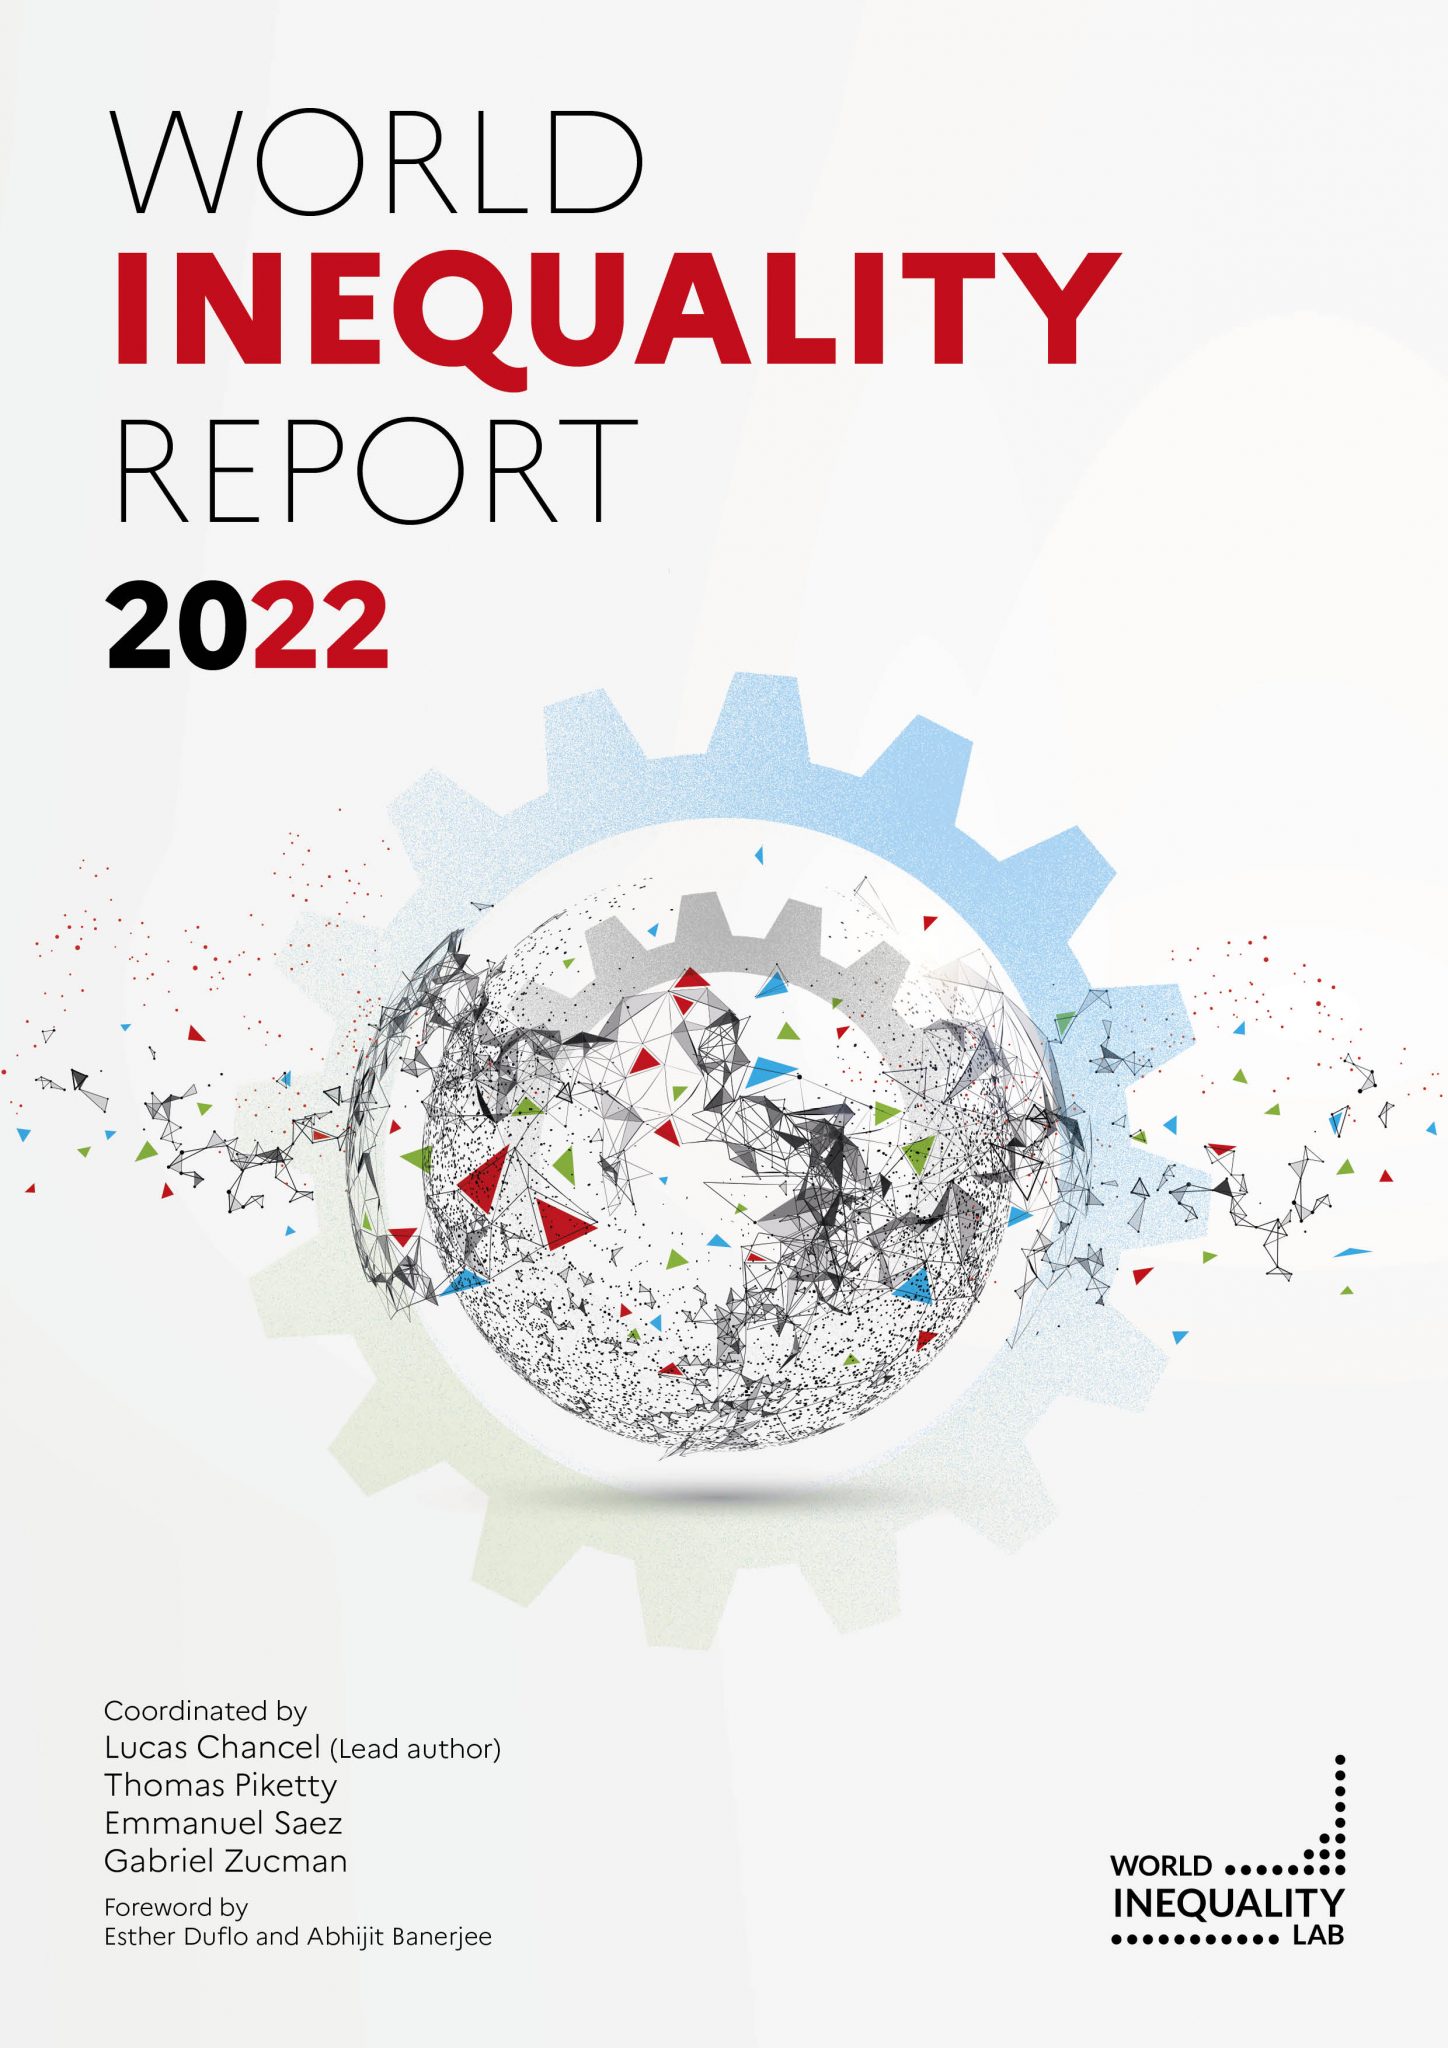 The World InequalityReport 2022 presents the most uptodate & complete